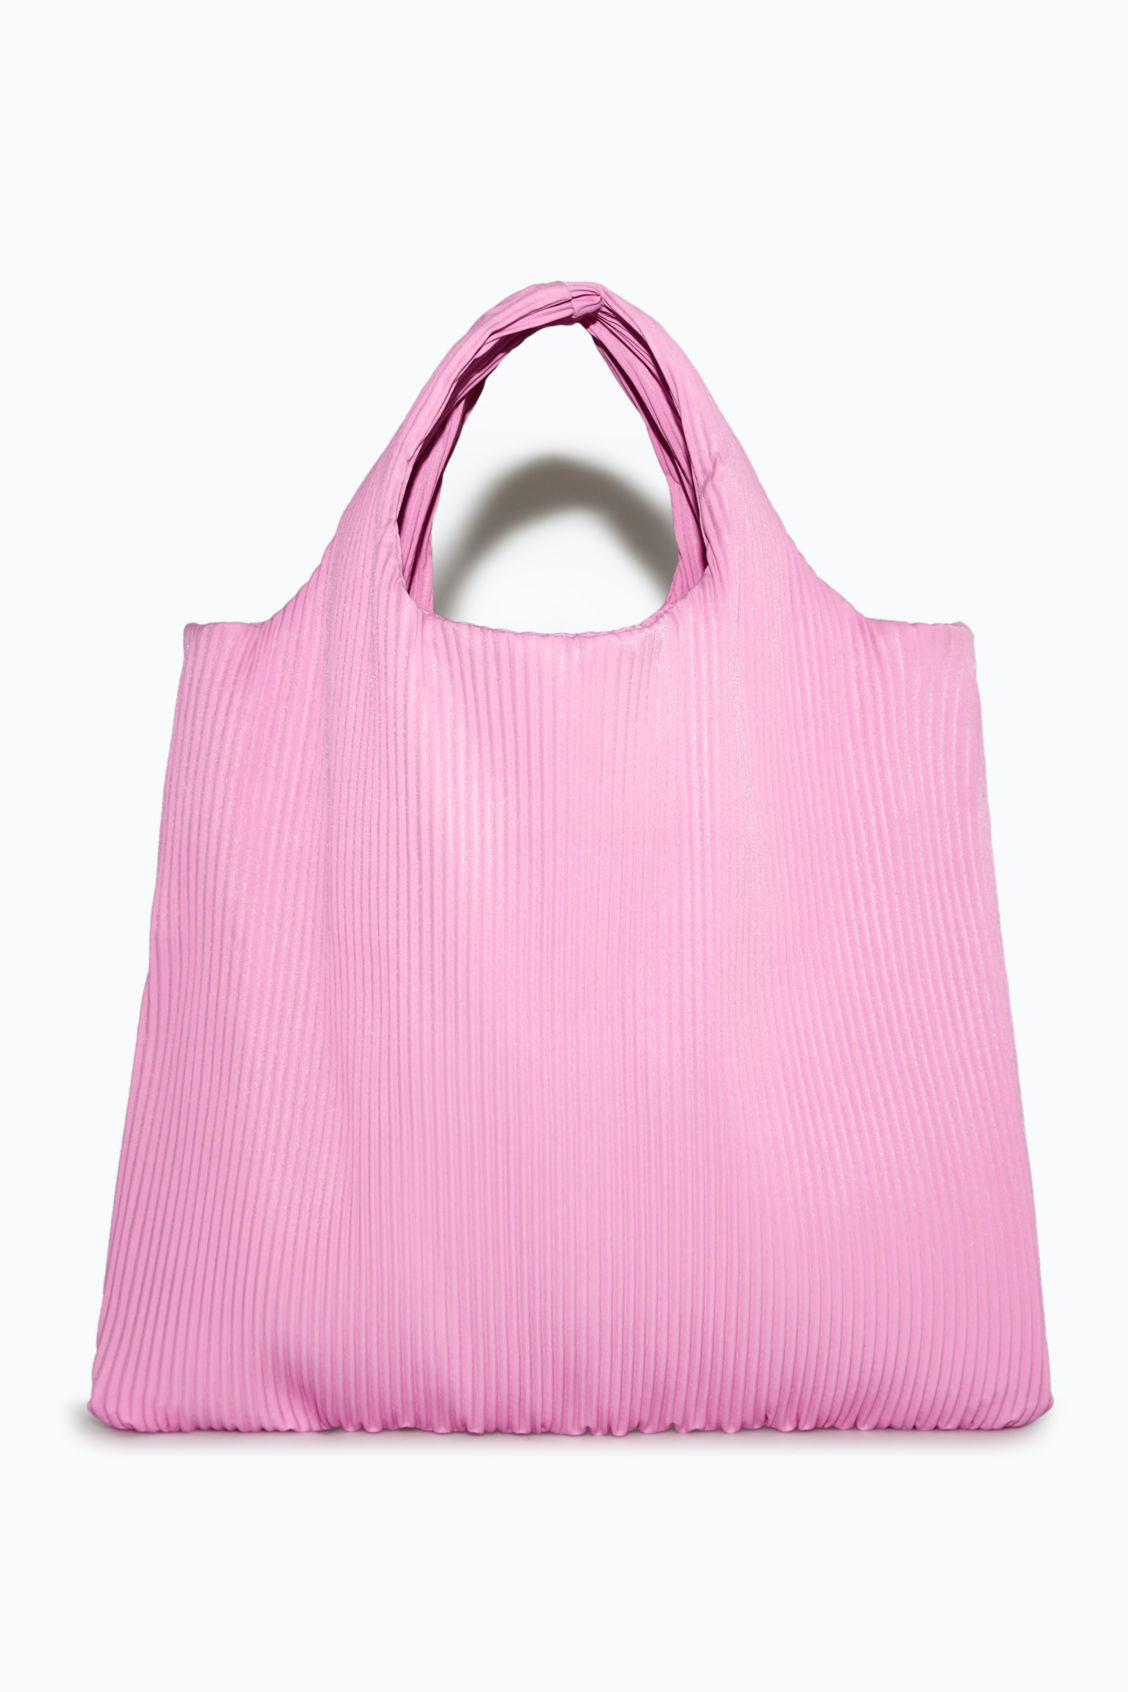 COS Small Pleated Tote Bag €39,